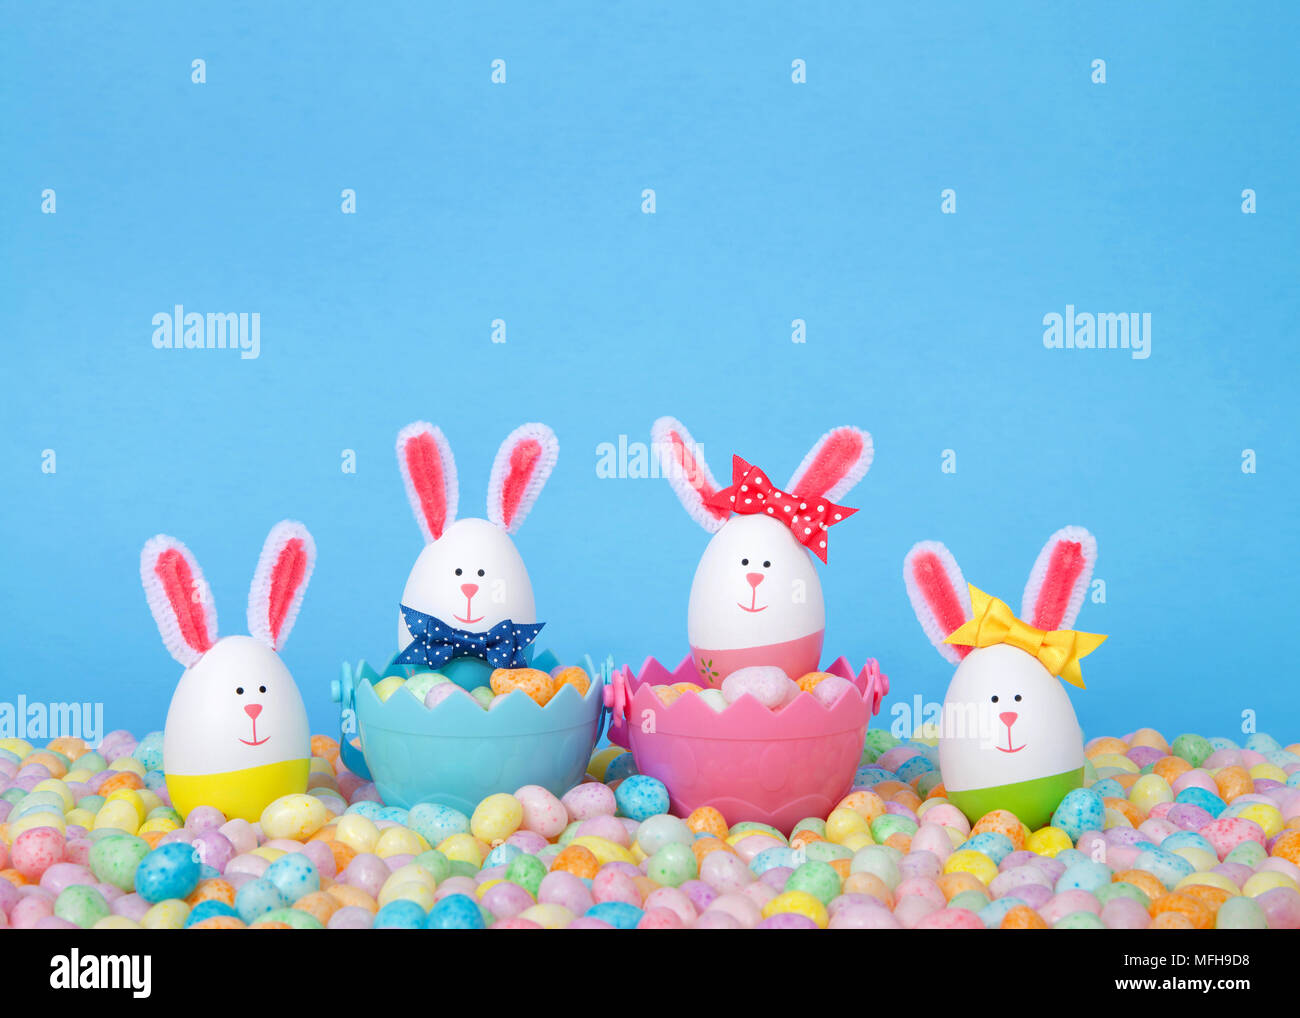 Craft Easter Bunnies made from plastic eggs Two in baskets full of candy with two standing in pastel jelly beans with a light blue background. Fun Eas Stock Photo